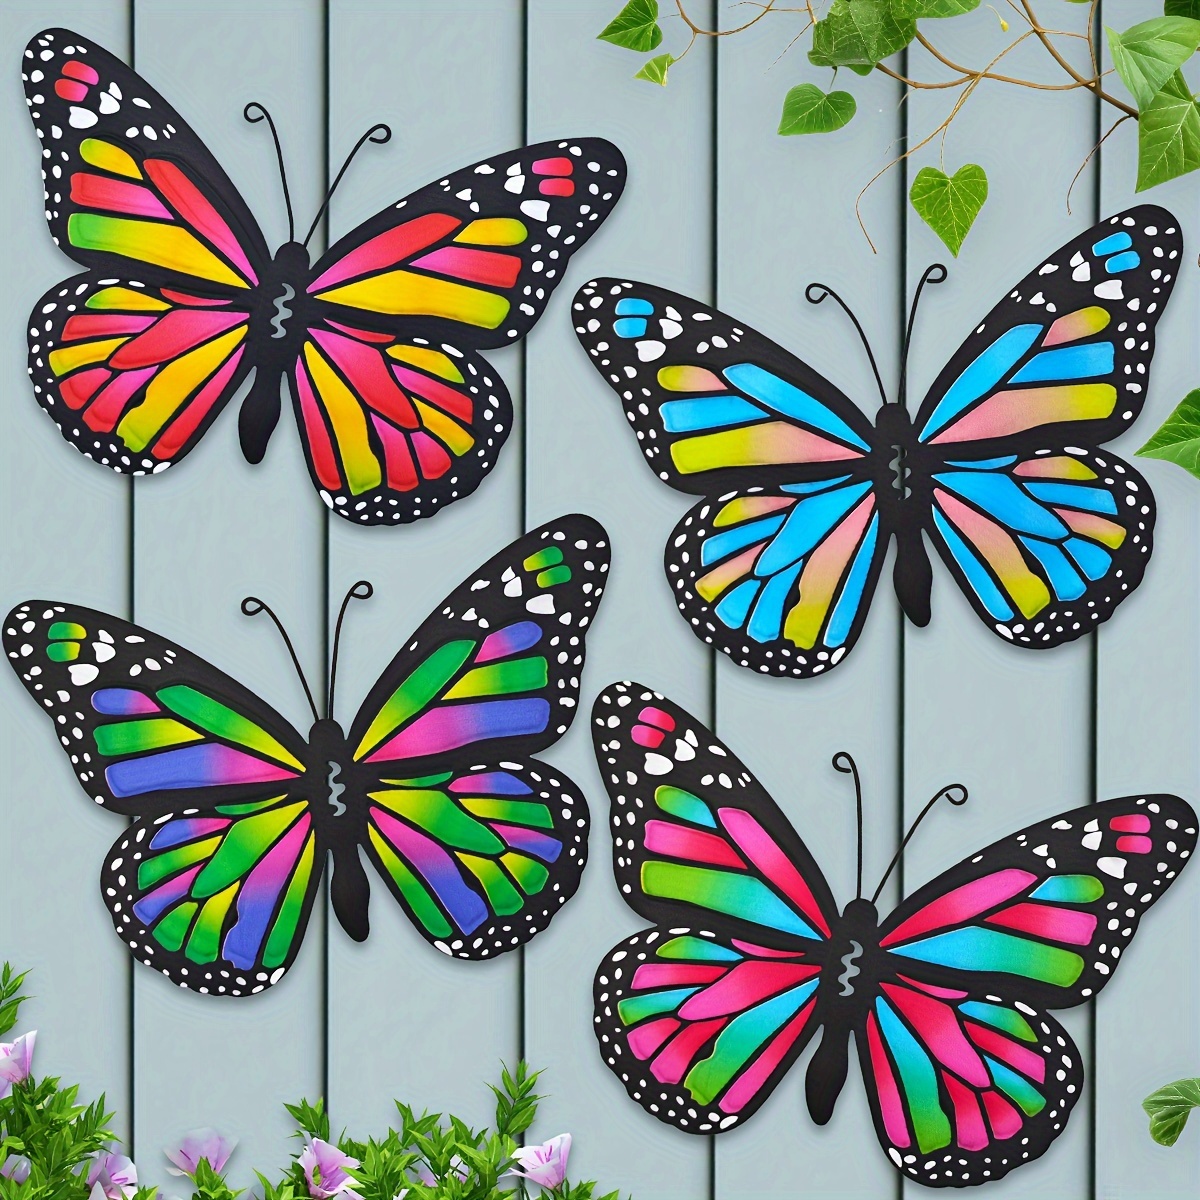 

Set Of 4 Colorful Metal Butterflies, 25cm Iron Wall Art For Garden & Outdoor Decor - Perfect Gift For Parents & Friends, No Power Needed